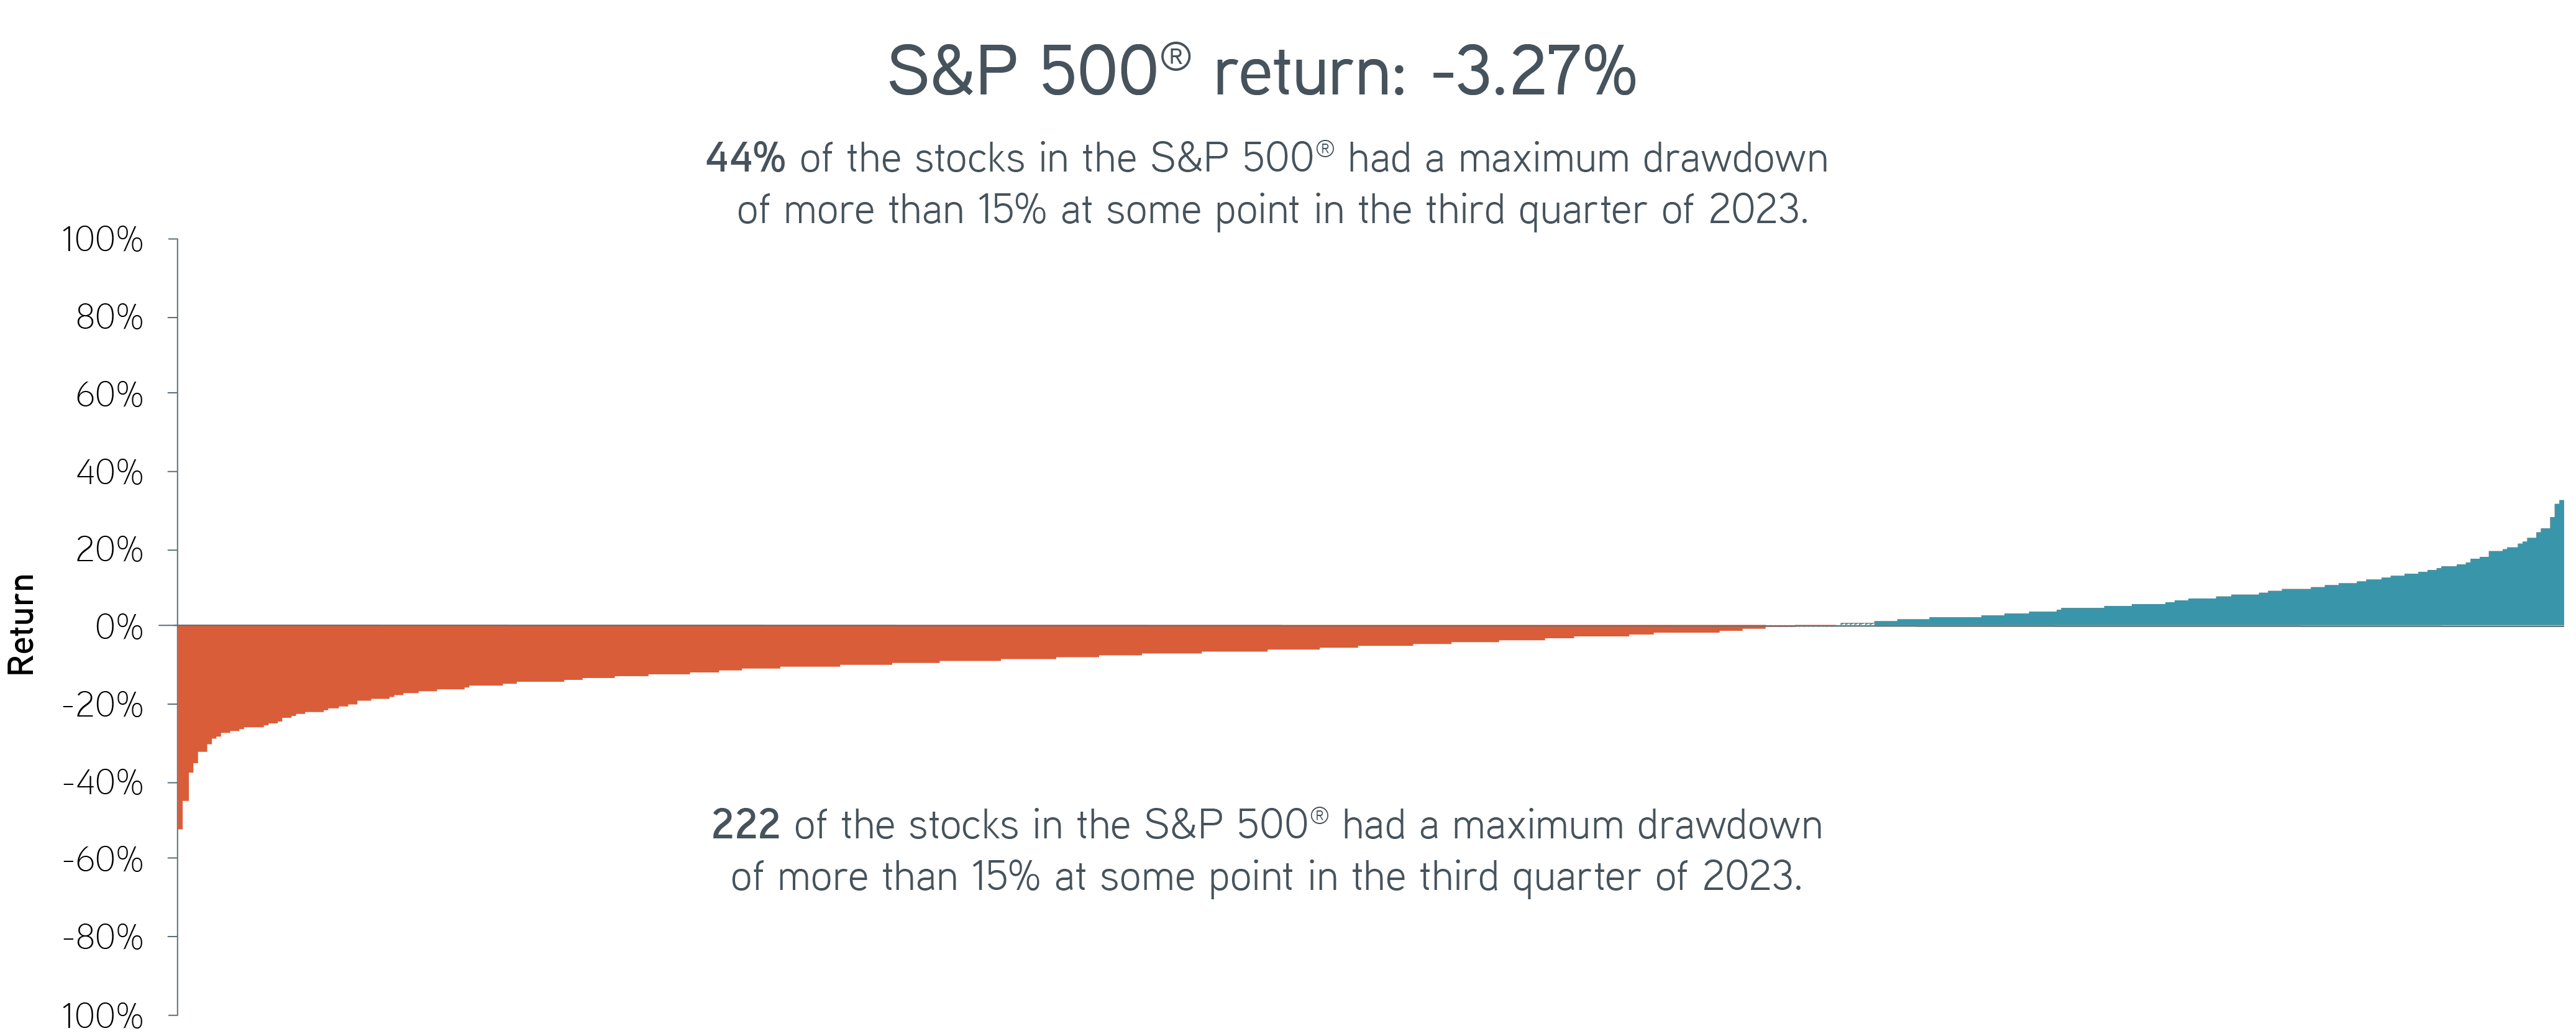 44% of the stocks in the S&P 500 had a maximum drawdown of more than 15% at some point in the third quarter of 2023. 222 of the stocks in the S&P 500 had a maximum drawdown of more than 15% at some point in the third quarter of 2023.